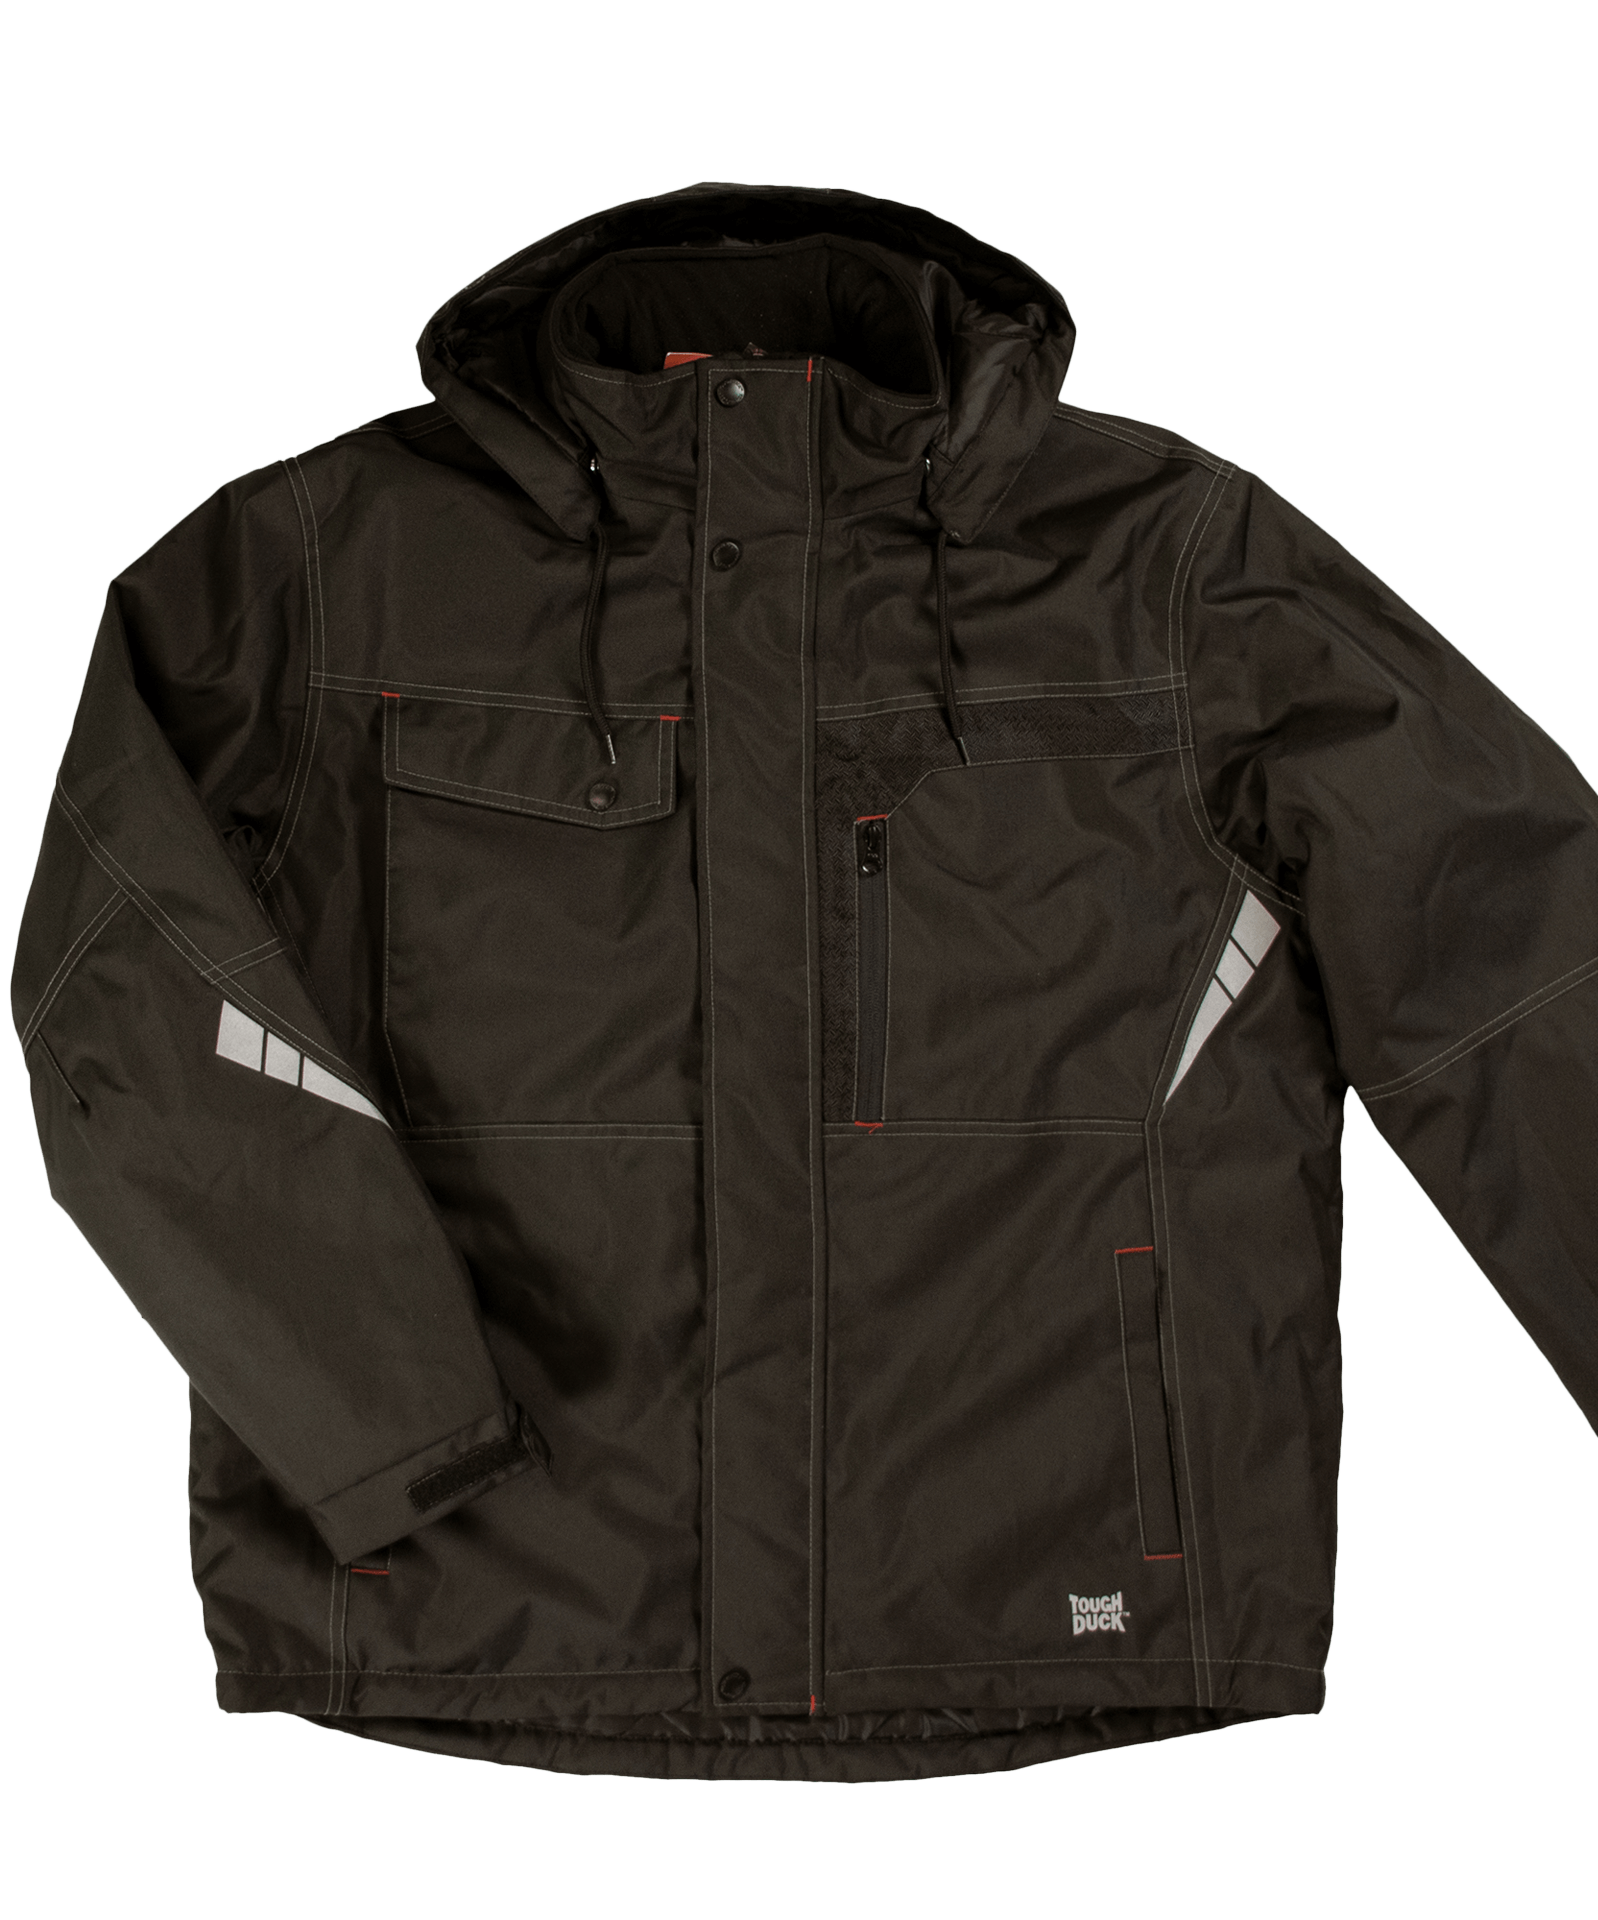 Tough Duck Poly Oxford Jacket - Weaver and Devore Trading Ltd